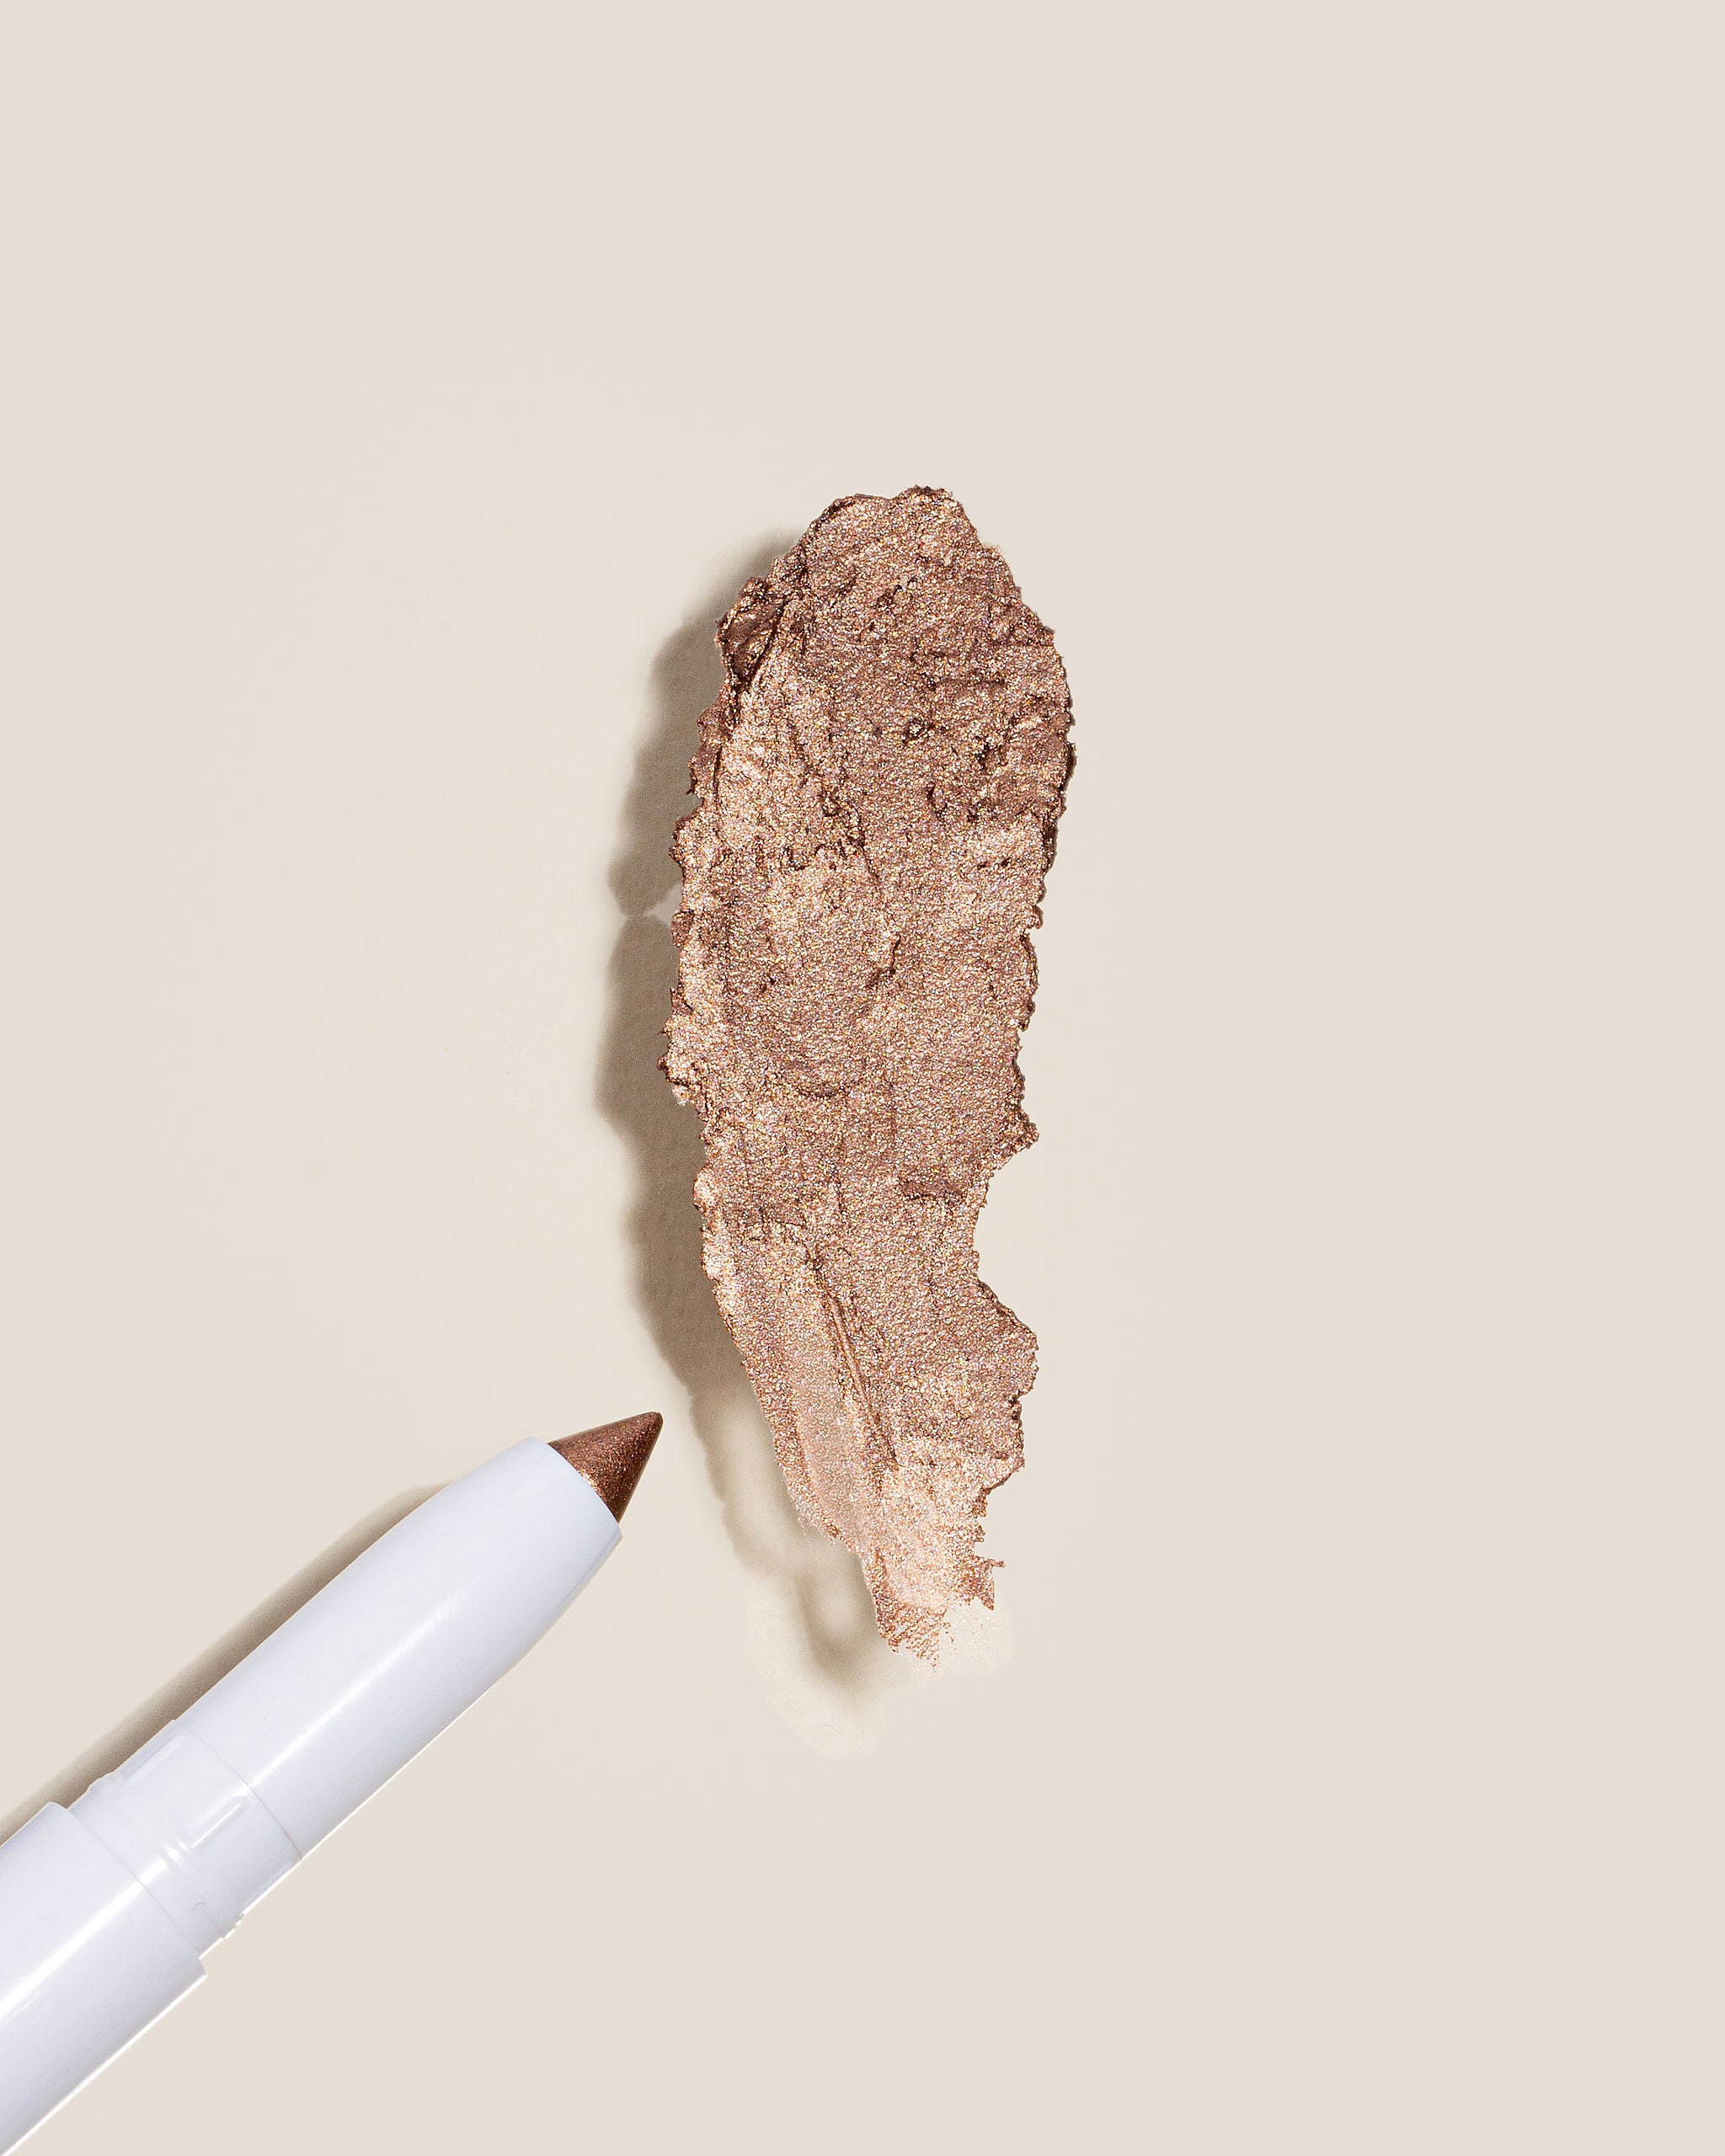 Swatch of Rose Colored Glasses, a rose gold shimmer of the cream eye shadow stick for a natural shimmer that highlights eyes